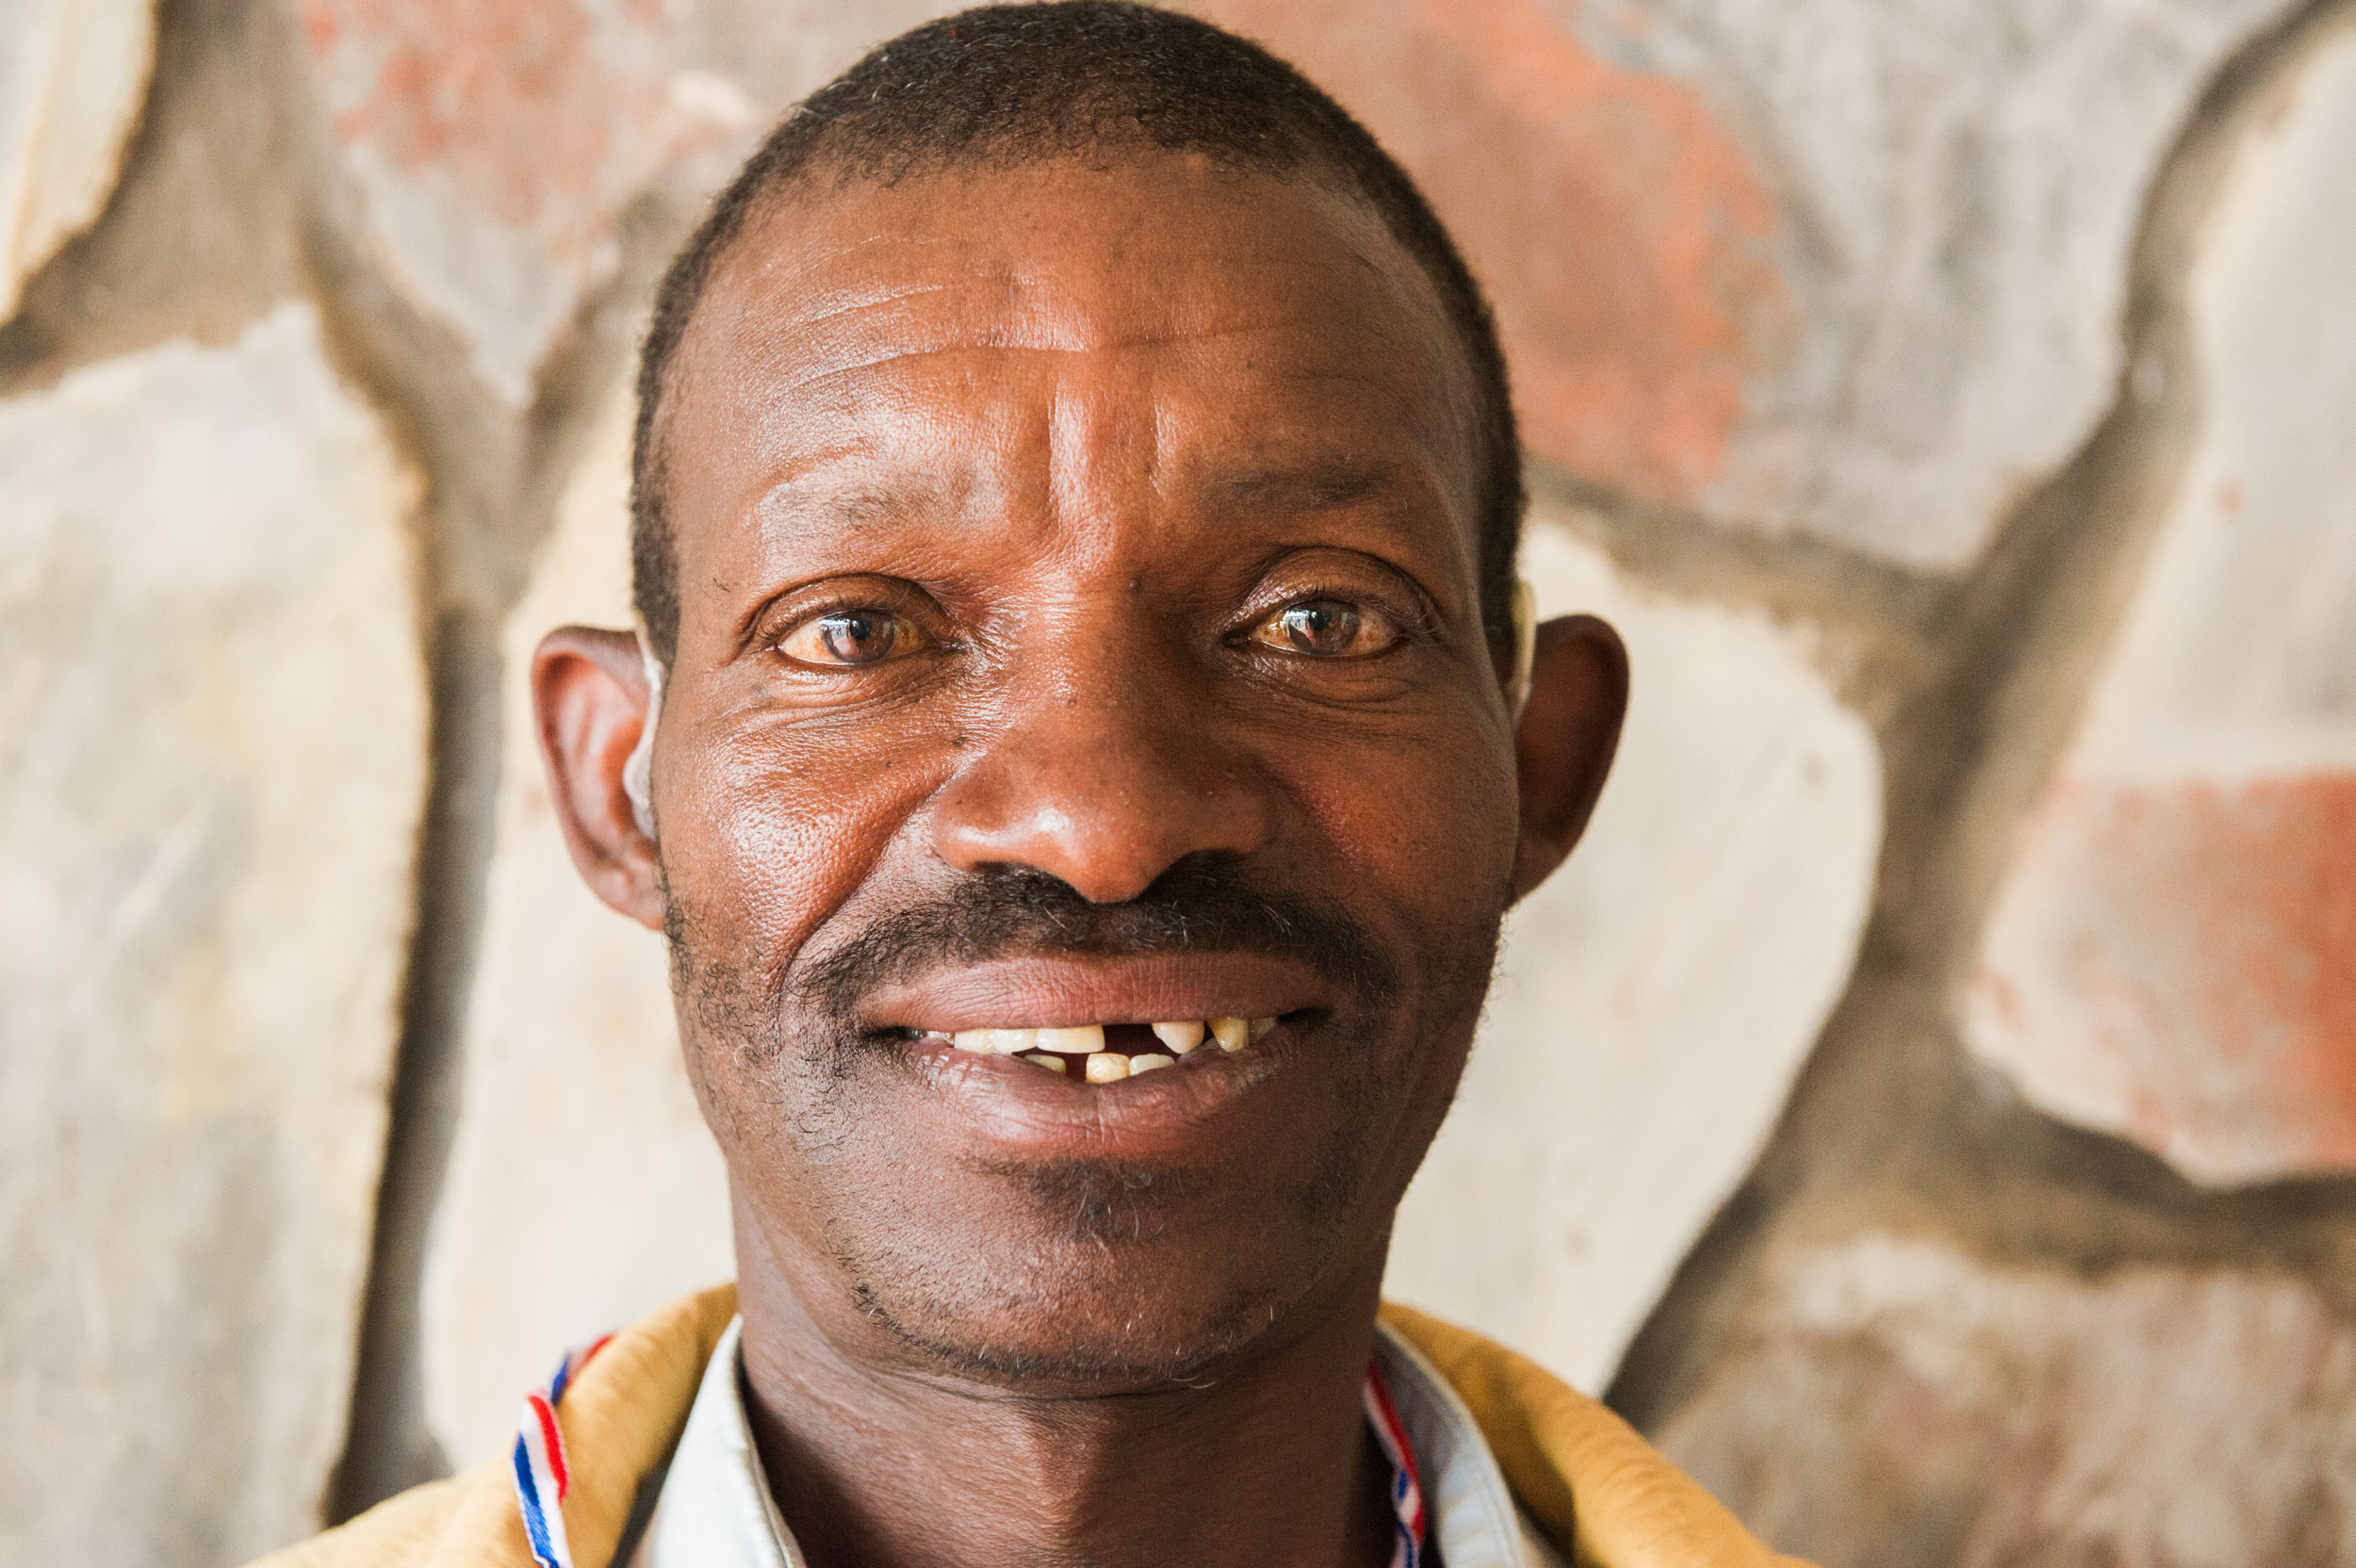  A man smiles after receiving a hearing aid. In 2011, NFL Pros for Africa (including Adrian Petersen and Larry Fitzgerald)&nbsp;and Starkey Hearing Foundation partnered to deliver more than 22,000 hearing aids to Rwandans. 